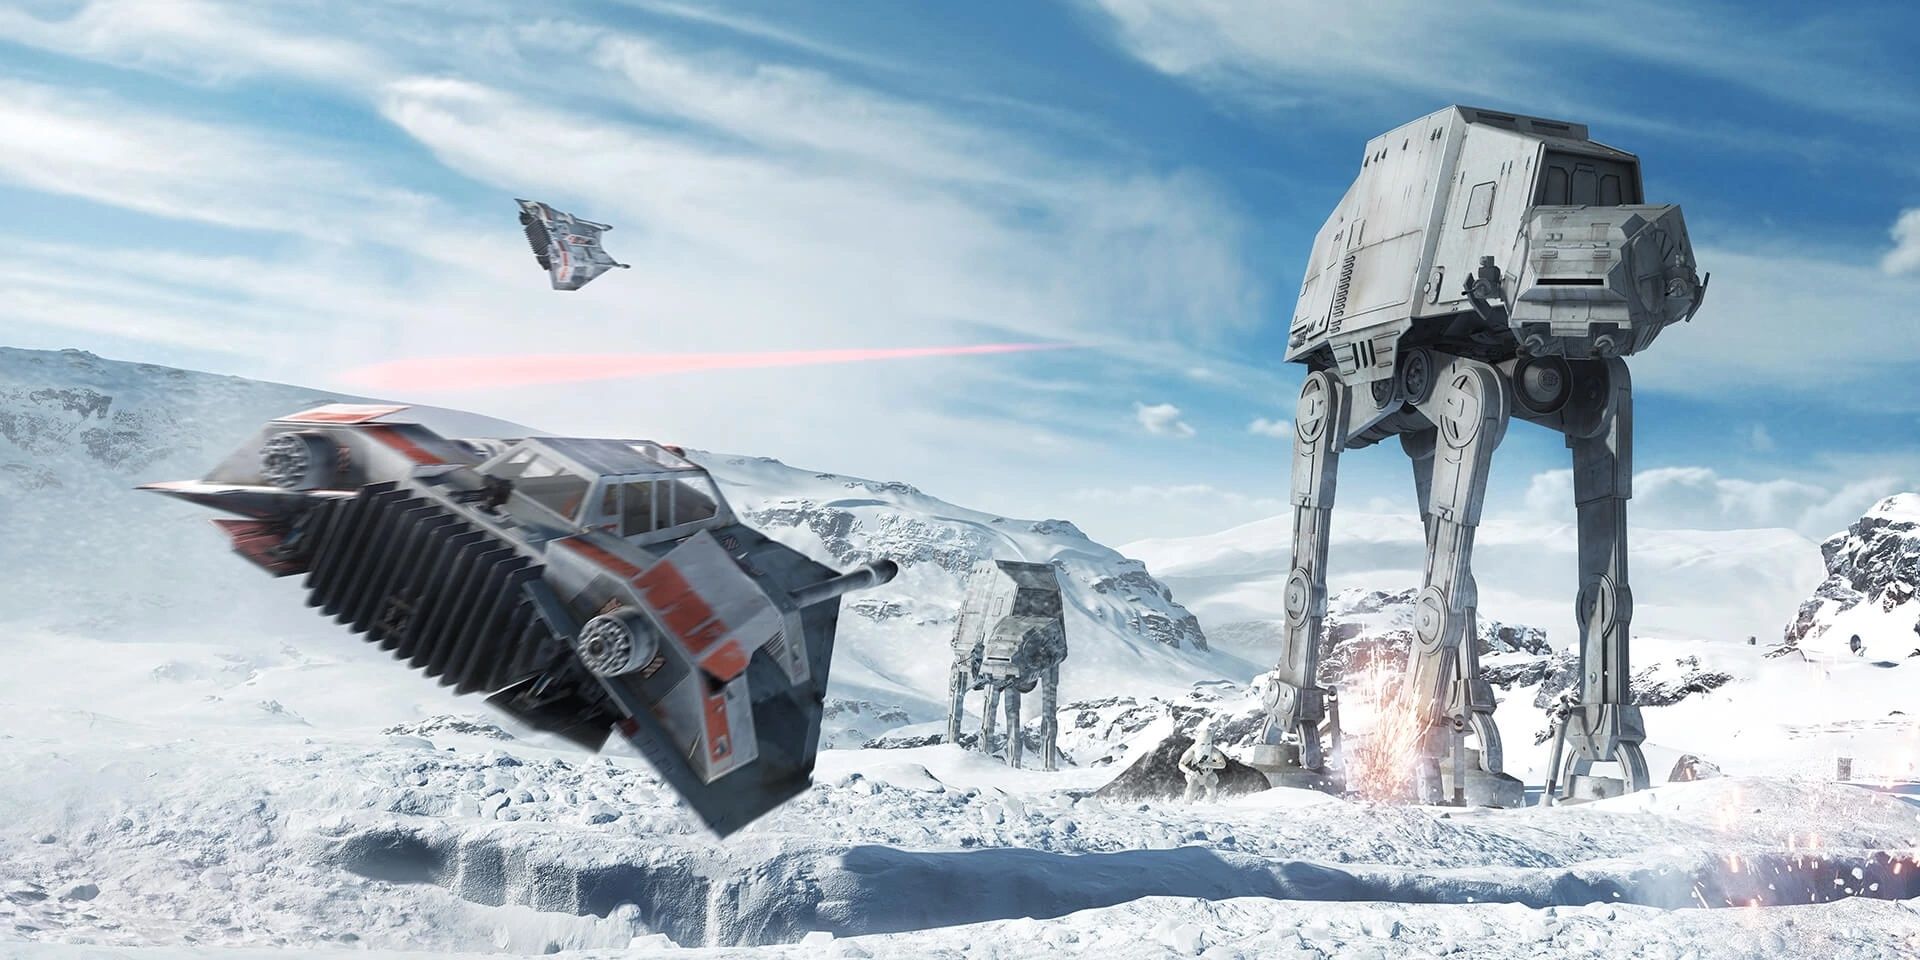 Battle of Hoth in Star Wars with a flight shooting at an AT-AT